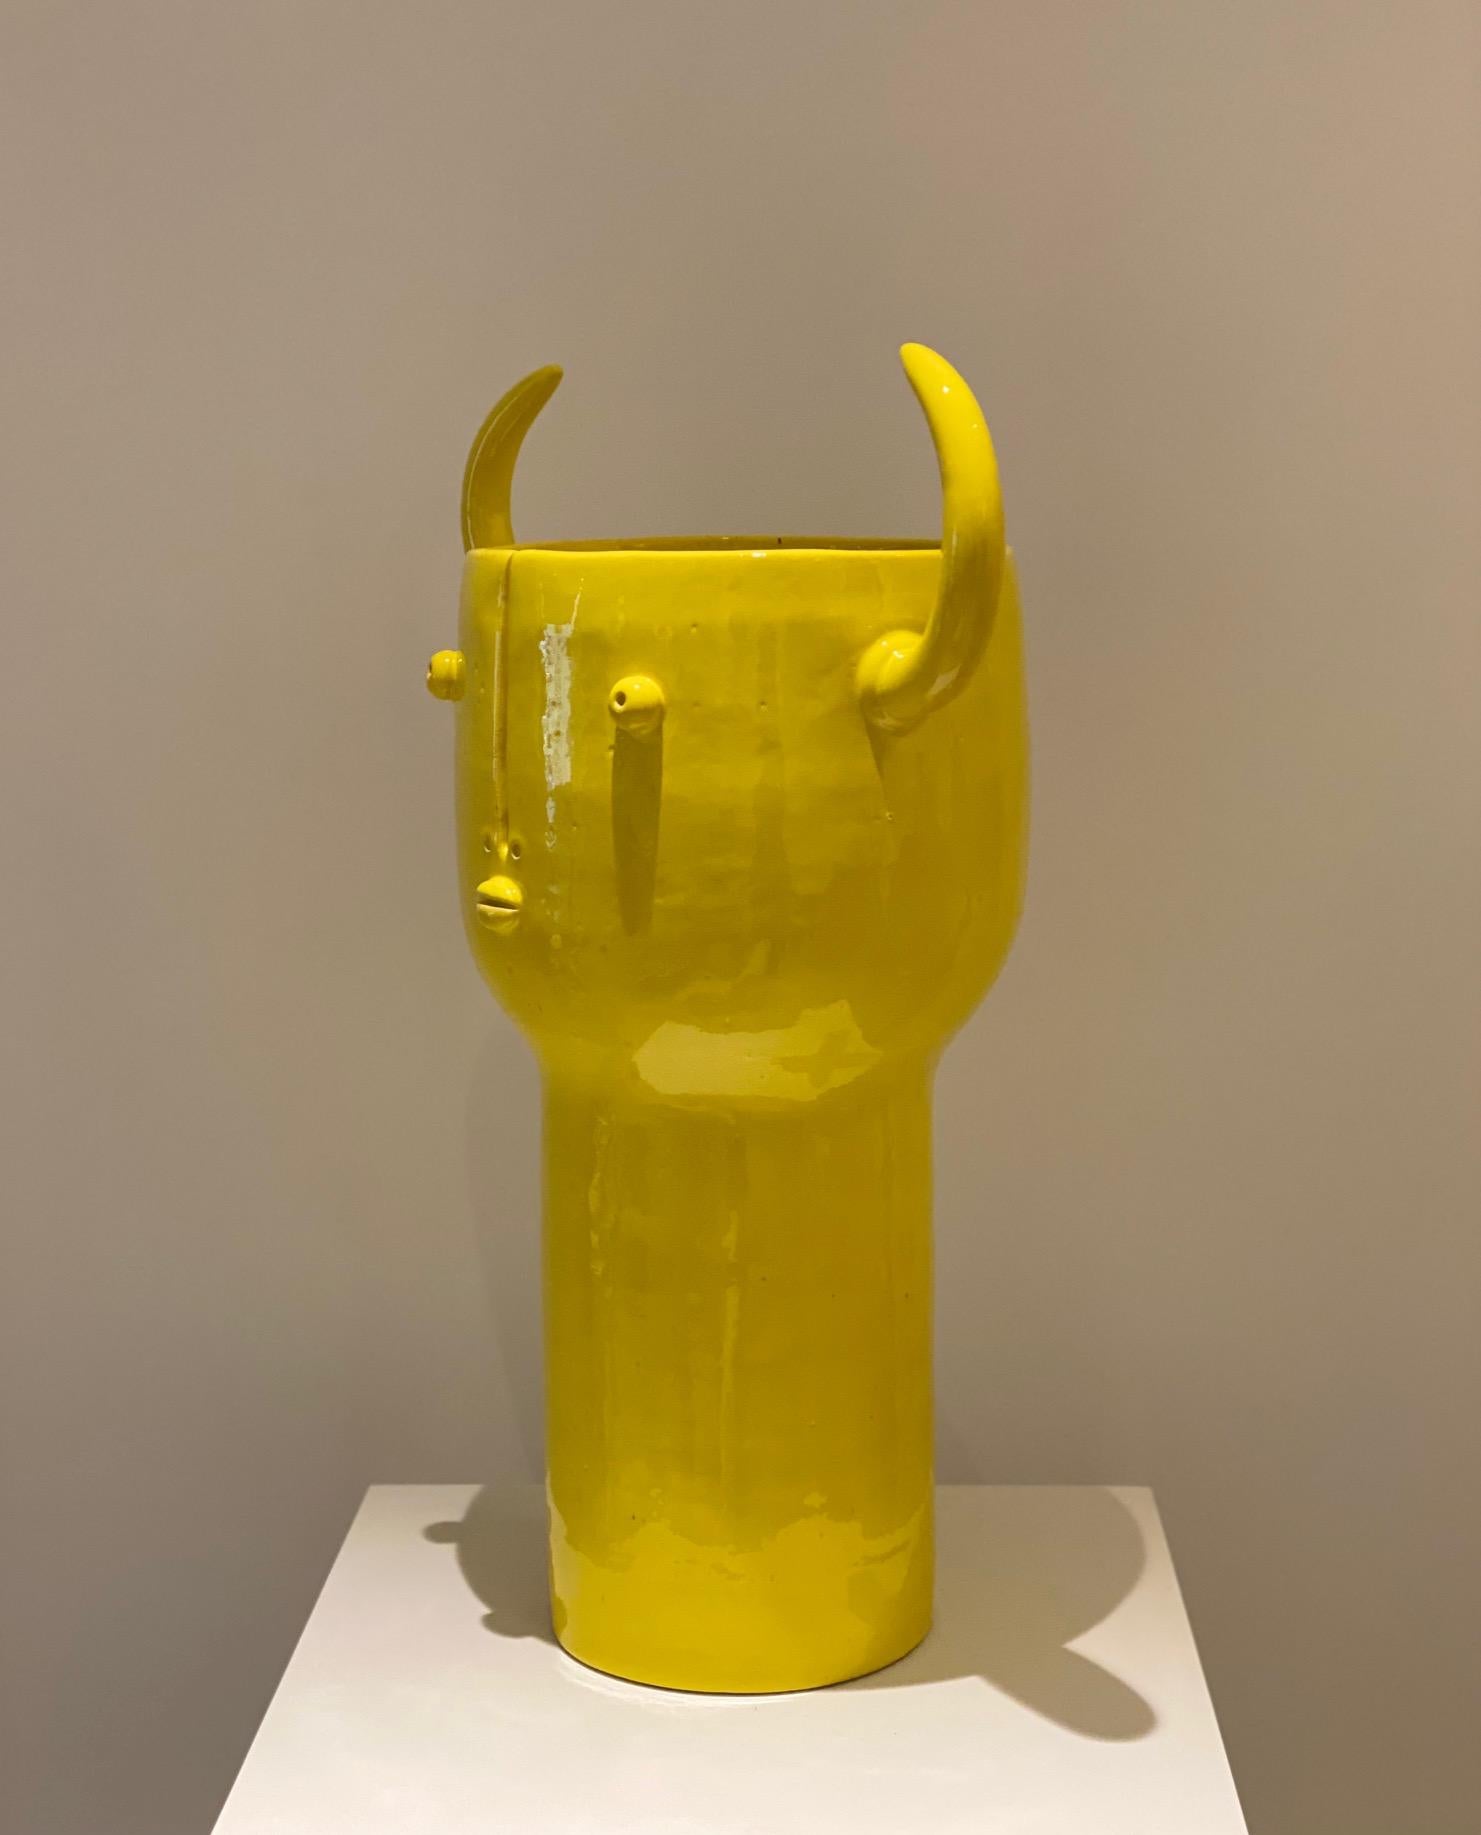 Contemporary One of a Kind Large Yellow Ceramic Vase or Sculpture Signed by Dalo For Sale